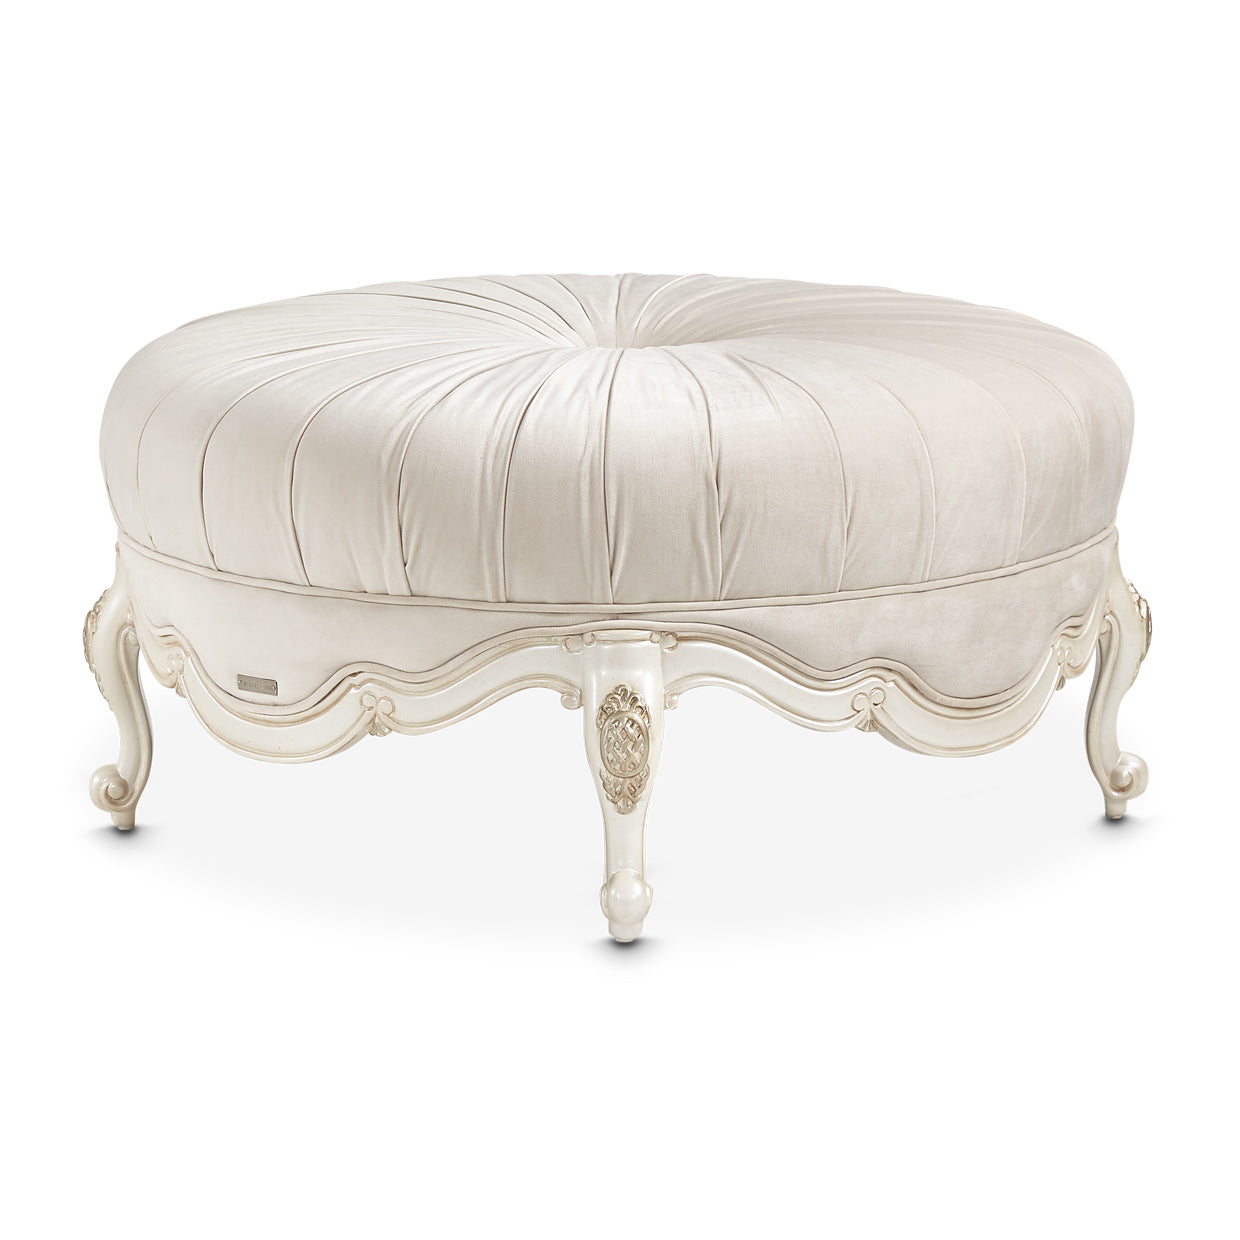 LAVELLE-CLASSIC PEARL Lavelle Rnd Cocktail Ottoman Ivory Classic Pearl - Dream art Gallery